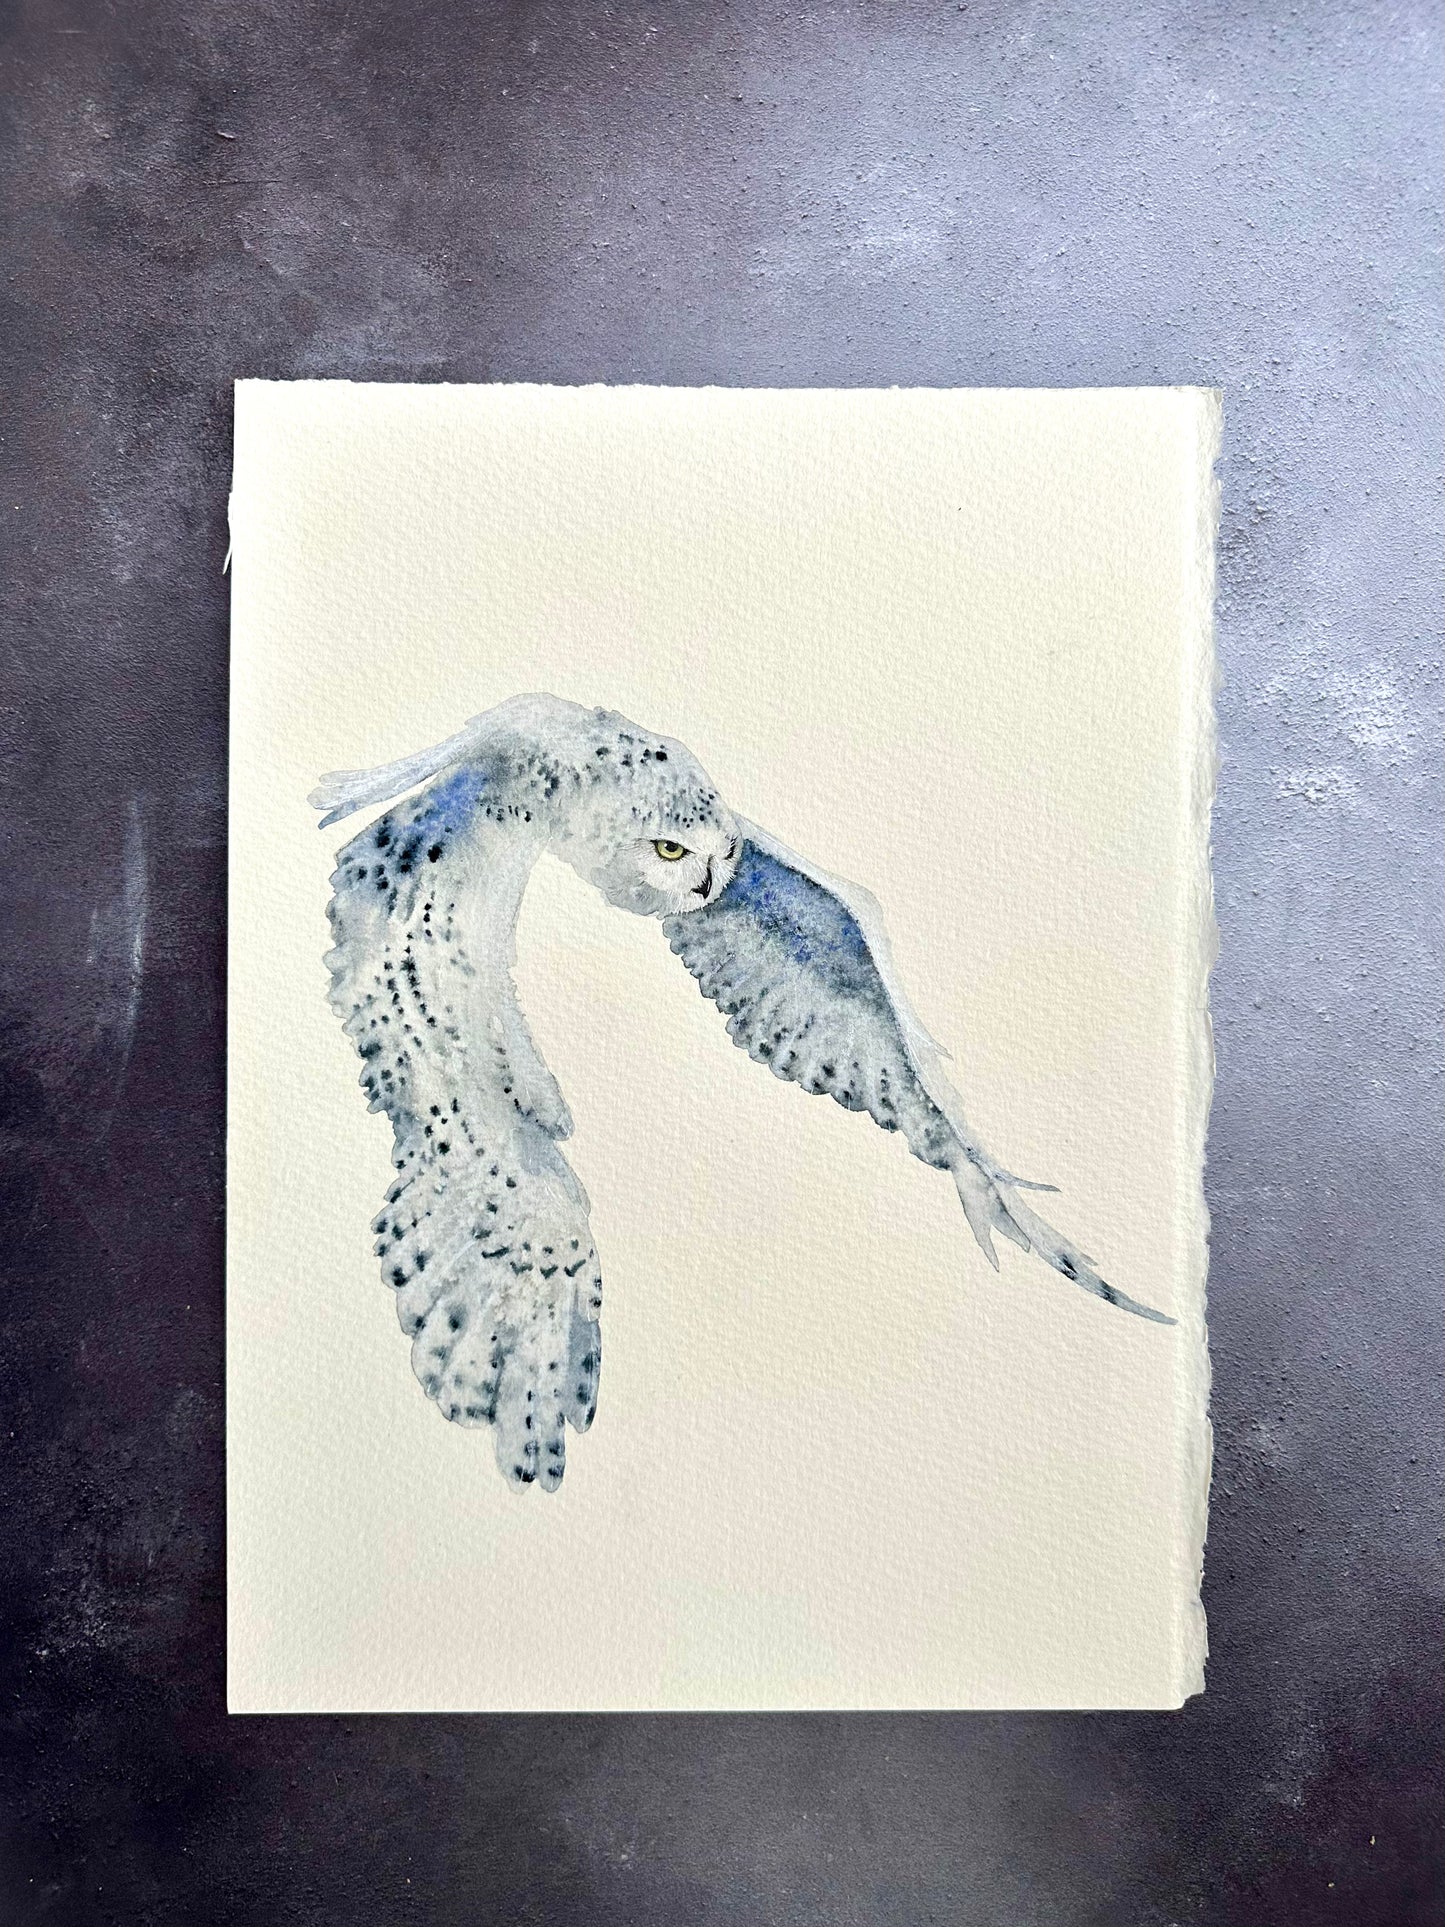 Hunting Snowy Owl - Original Watercolour Painting in A3 Moebe Frame